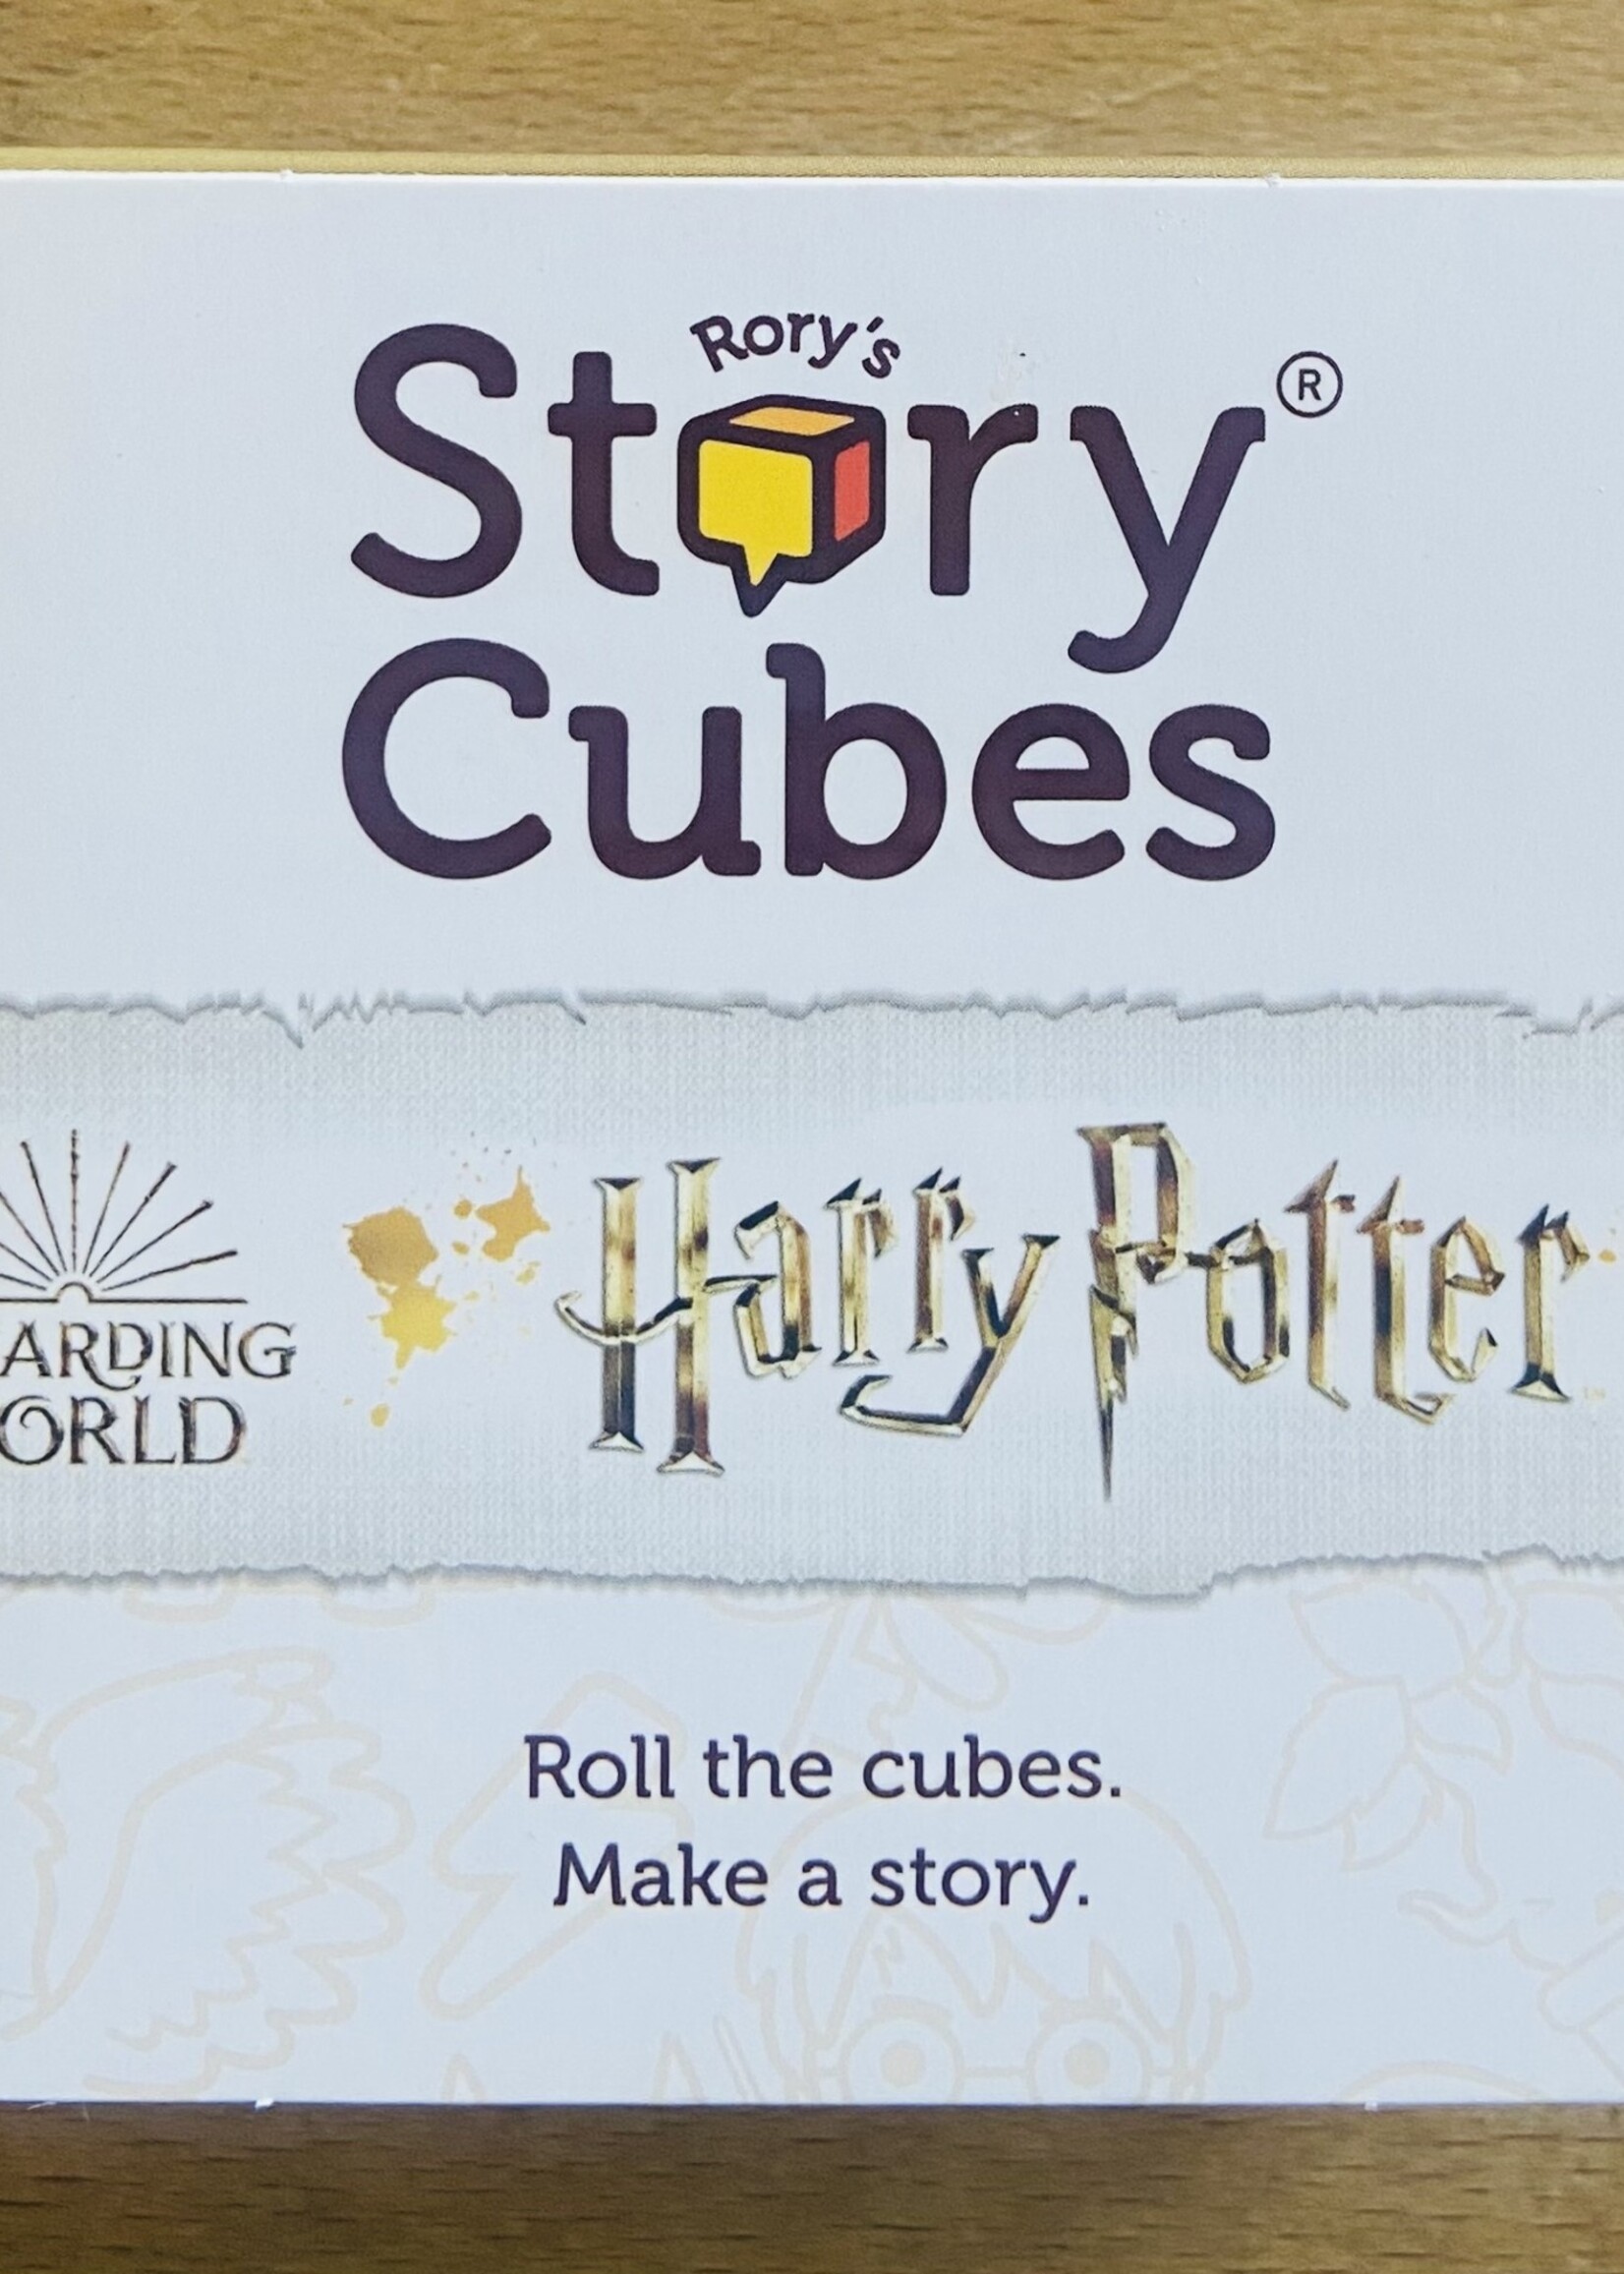 Game - Rory’s Story Cubes: Harry Potter